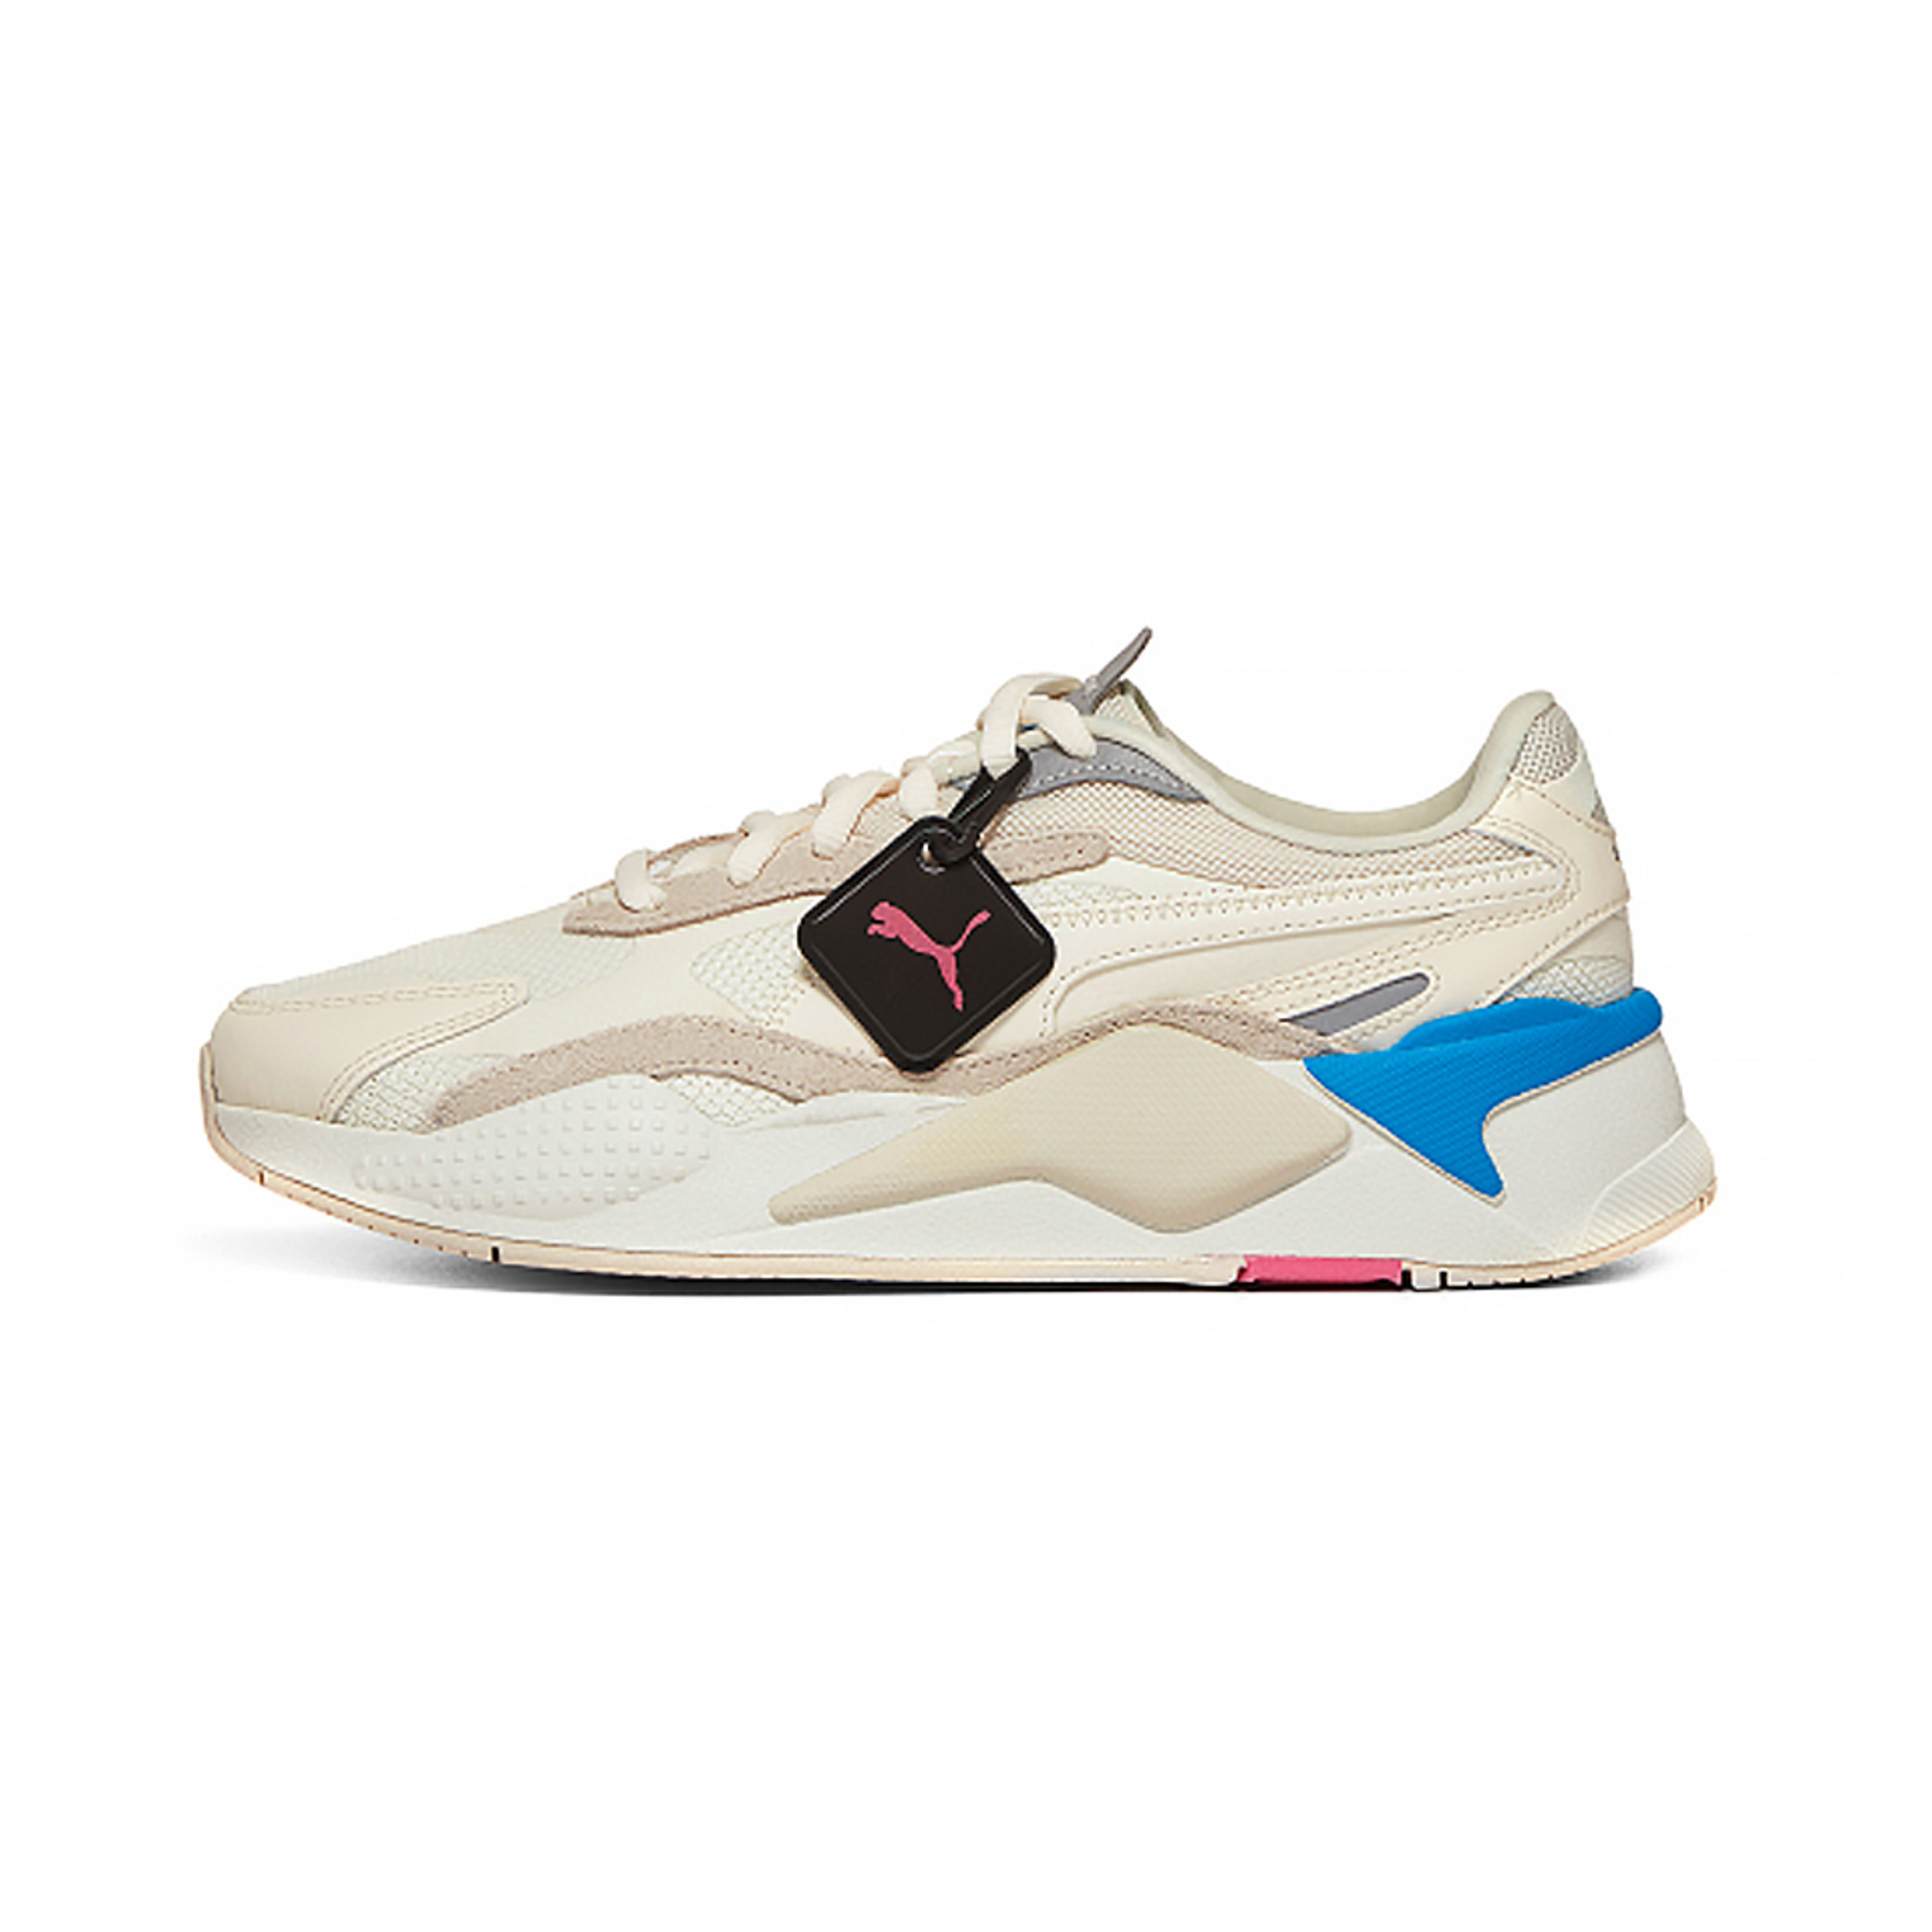 Puma Rs-X3 | The Sneaker House | Puma Sneakers Authentic | Hcm